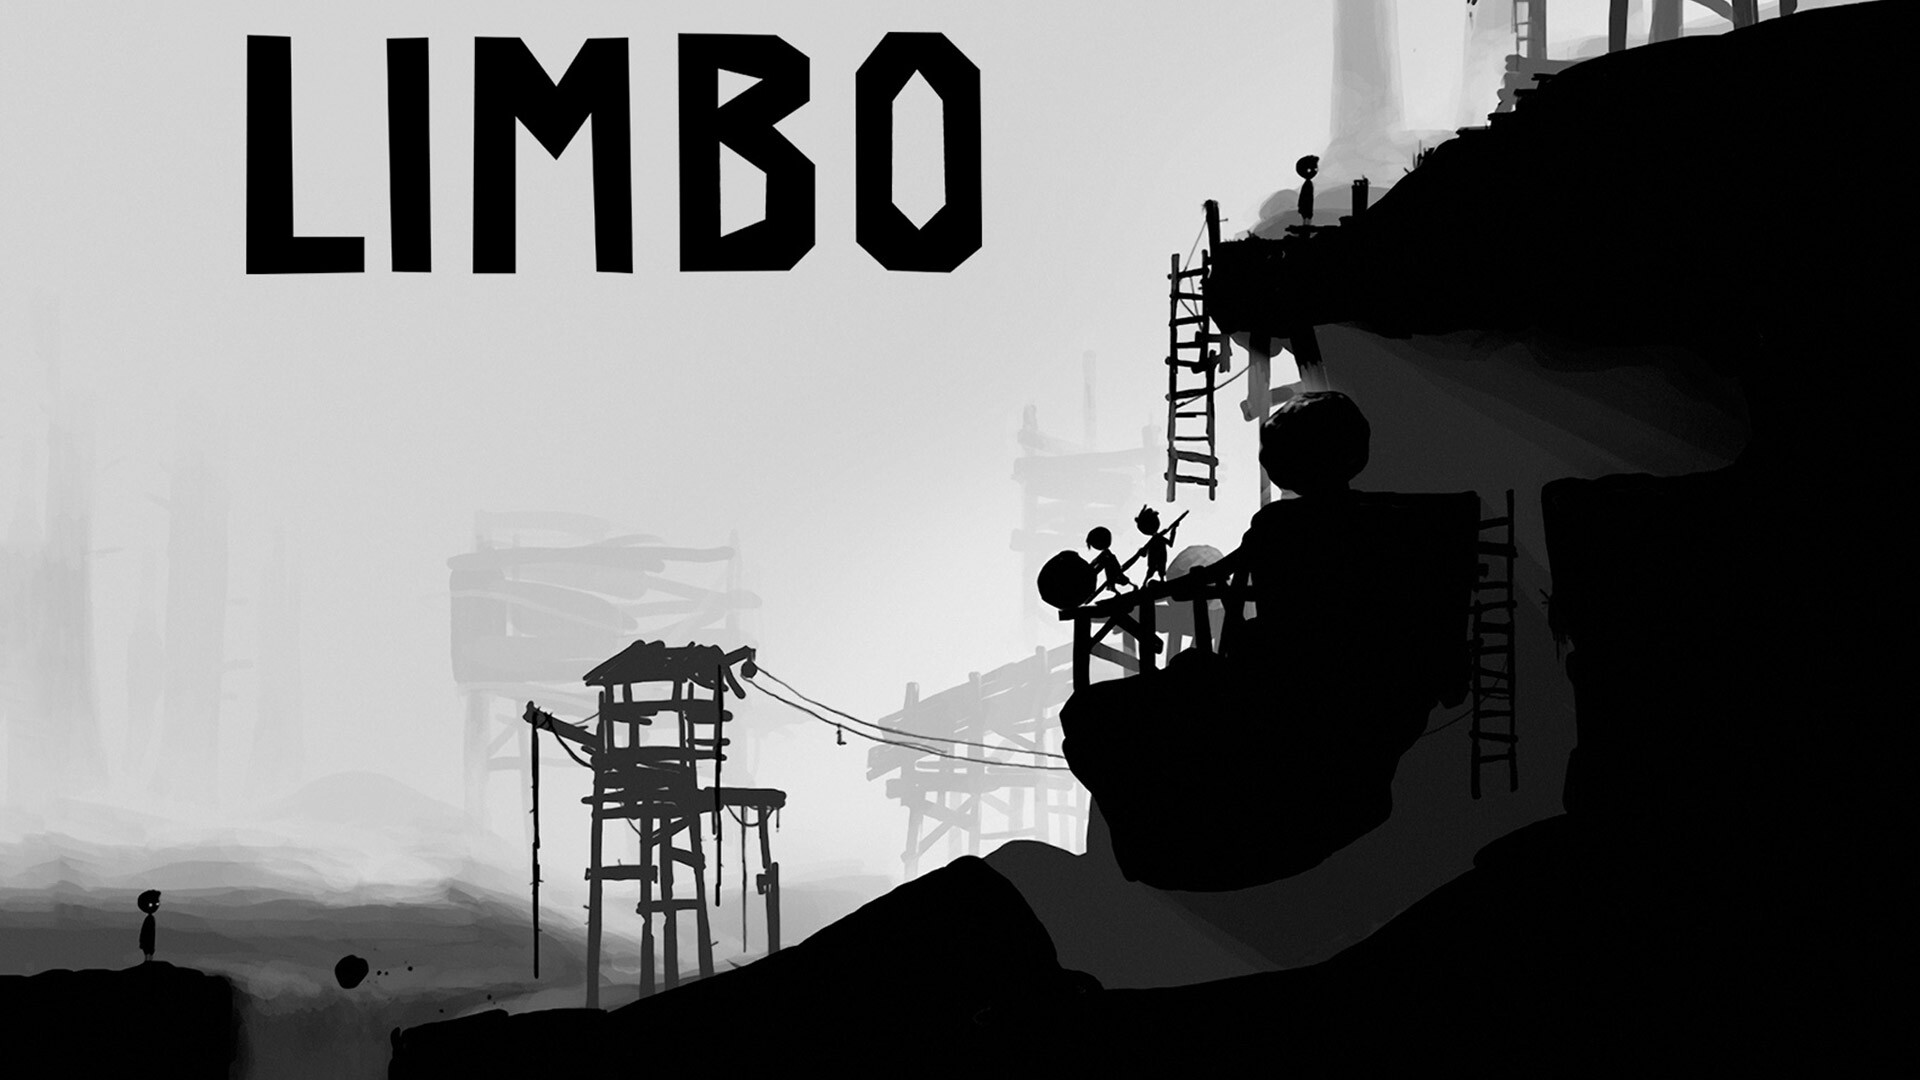 Limbo: The primary character in the game is a nameless boy in search of his sister, who awakens in the middle of a forest on the "edge of hell" where he encounters a giant spider who tries to kill him. 1920x1080 Full HD Background.